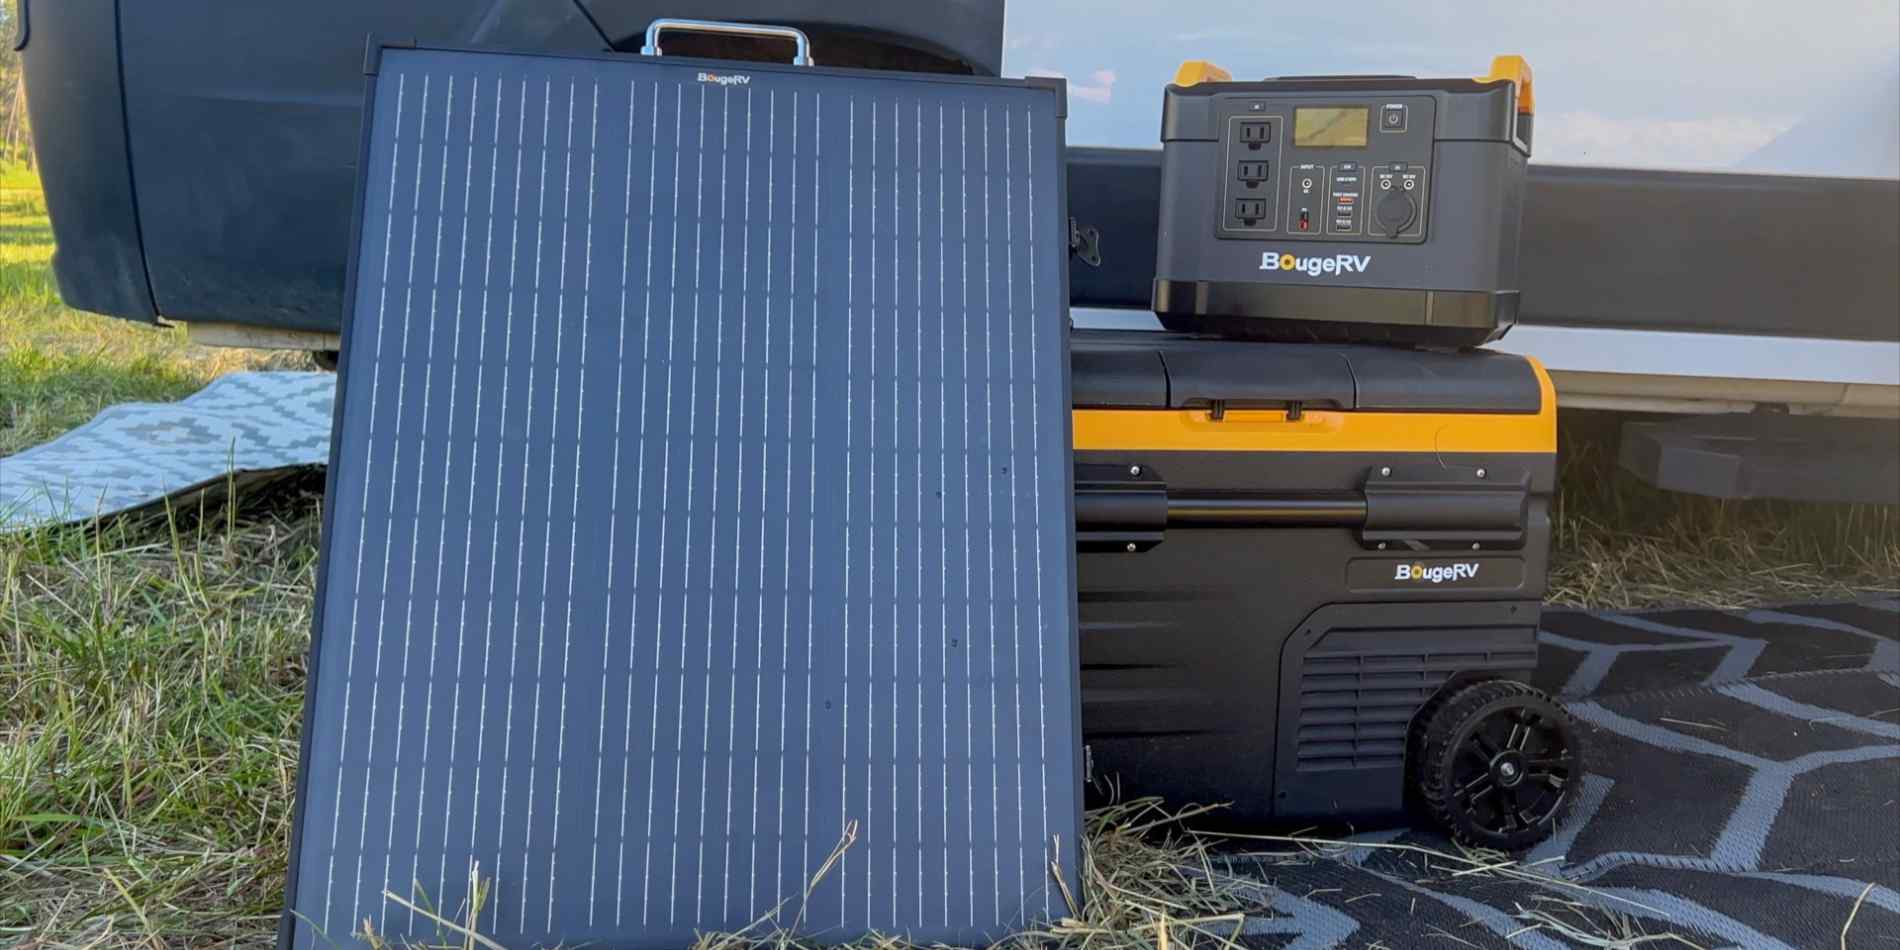 BougeRV’s waterproof portable solar panels, portable power station, and portable fridge